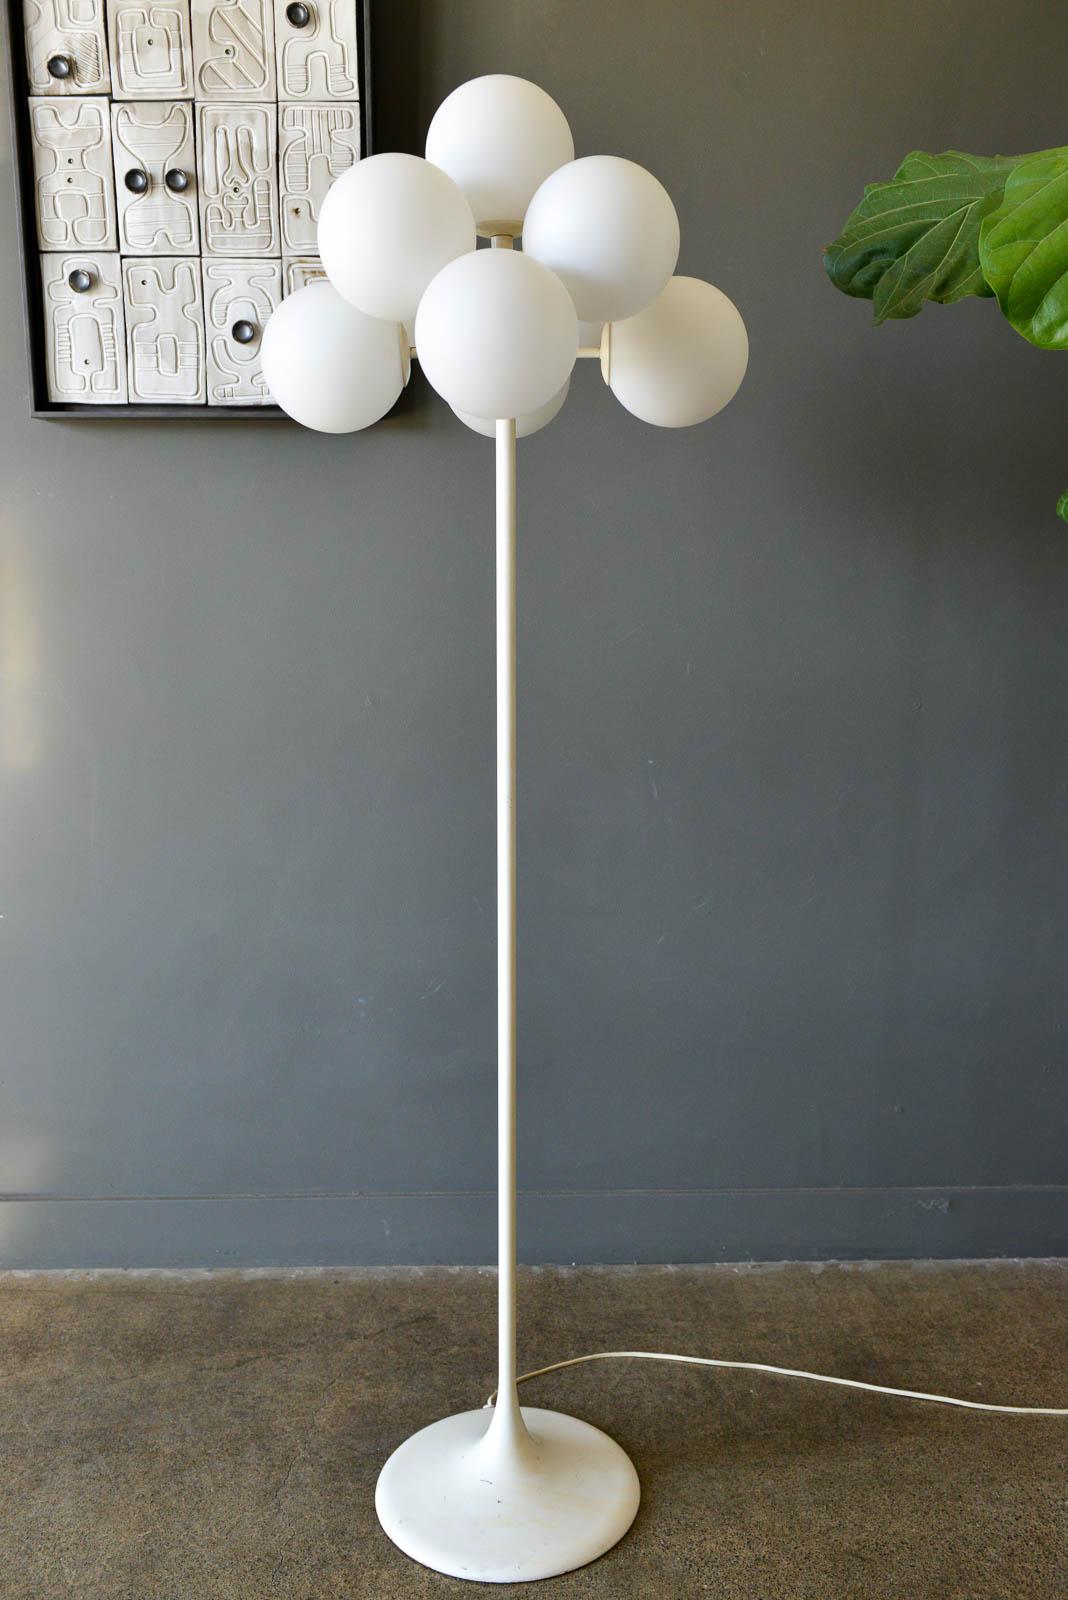 Eva Rene Nele Bode for Temde Leuchten Bubble Floor Lamp, 1965. Beautiful design with nine threaded blown glass globes on a cast aluminum base. Lamp is quite heavy and in very good original condition. White enameled base has some slight wear ash